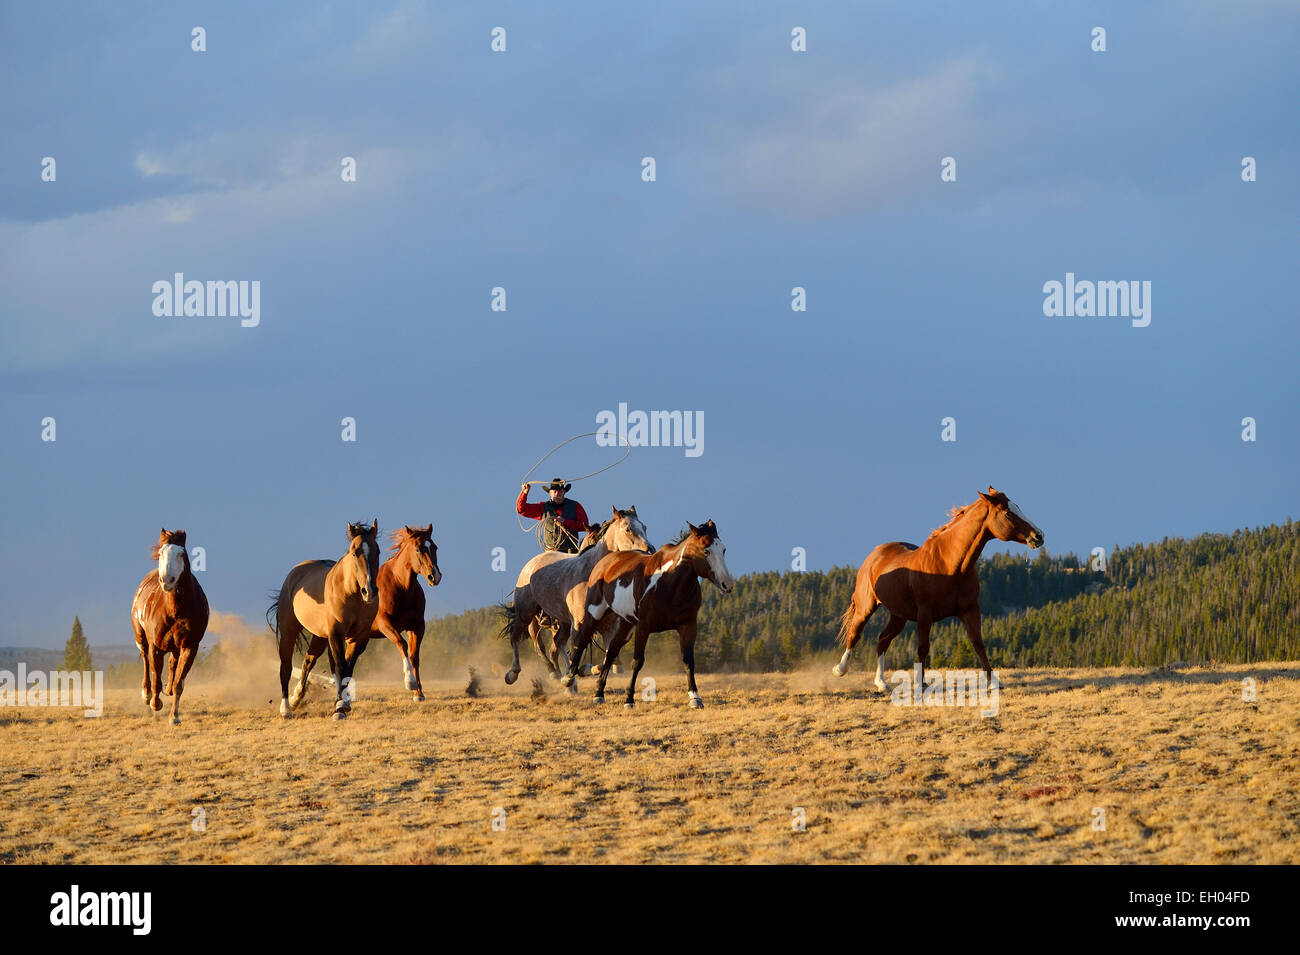 USA, Wyoming, riding cowboy with lasso herding horses in wilderness Stock Photo